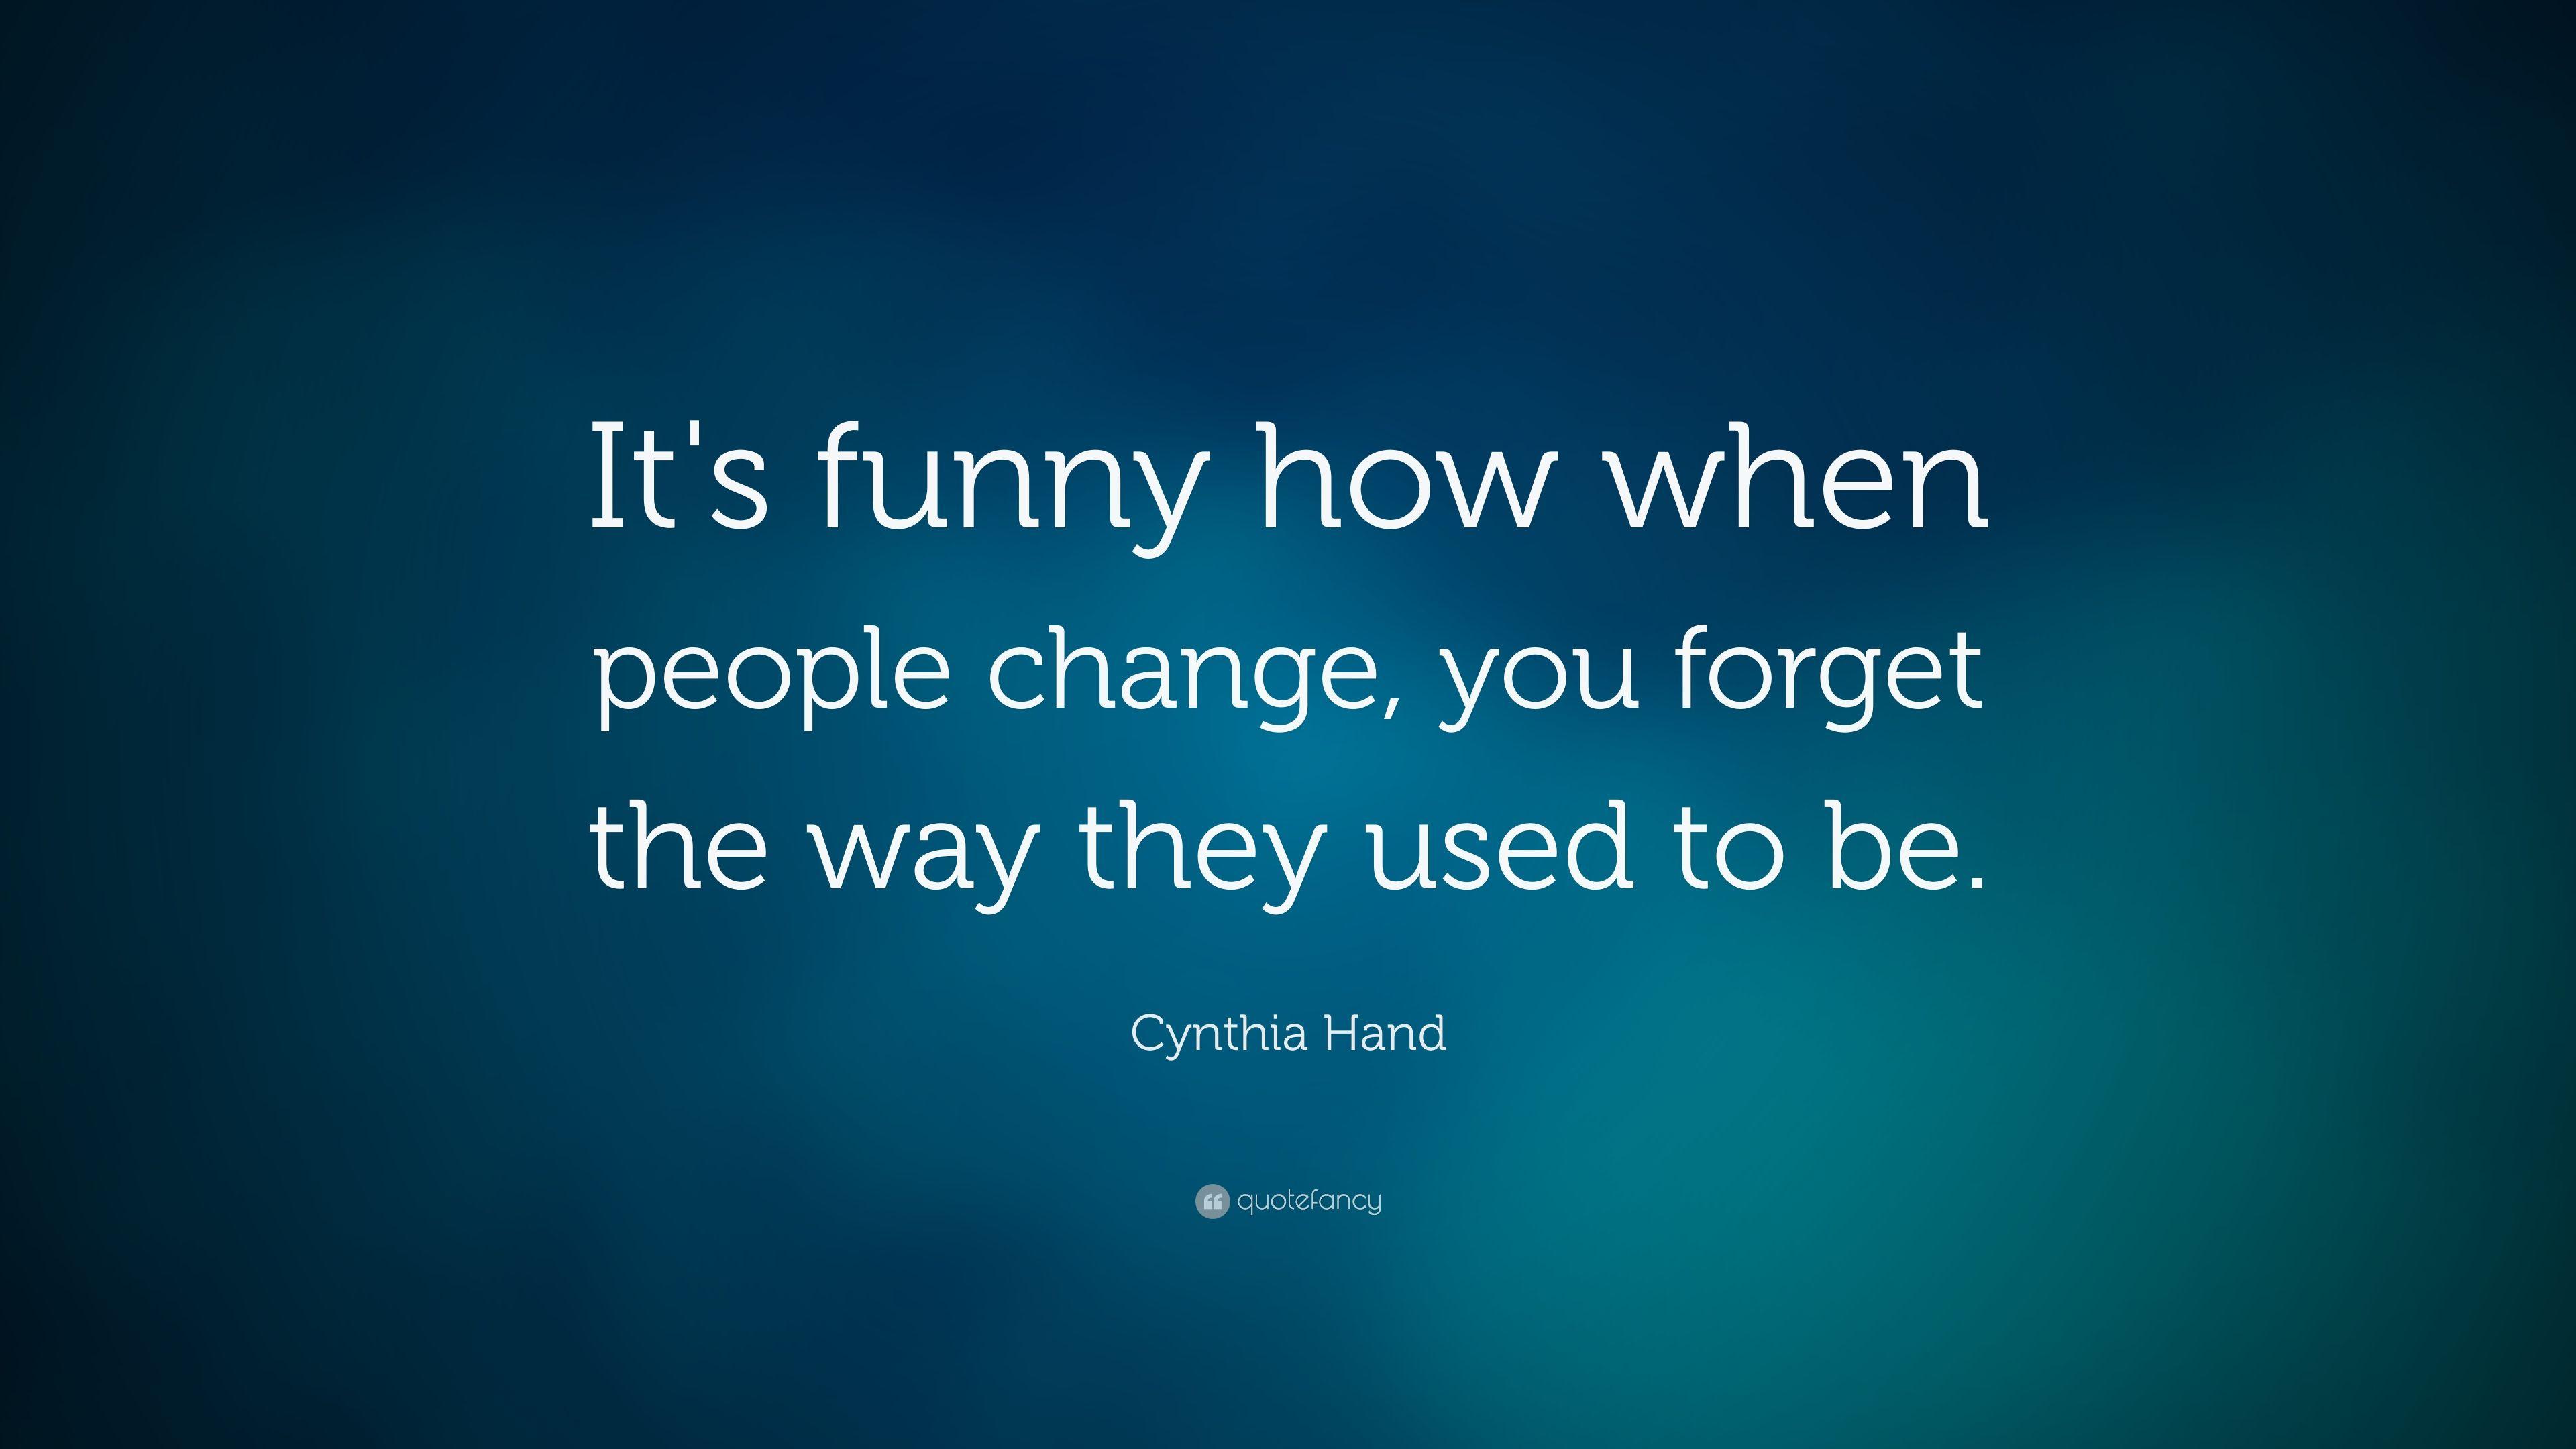 Cynthia Hand Quote: “It's funny how when people change, you forget